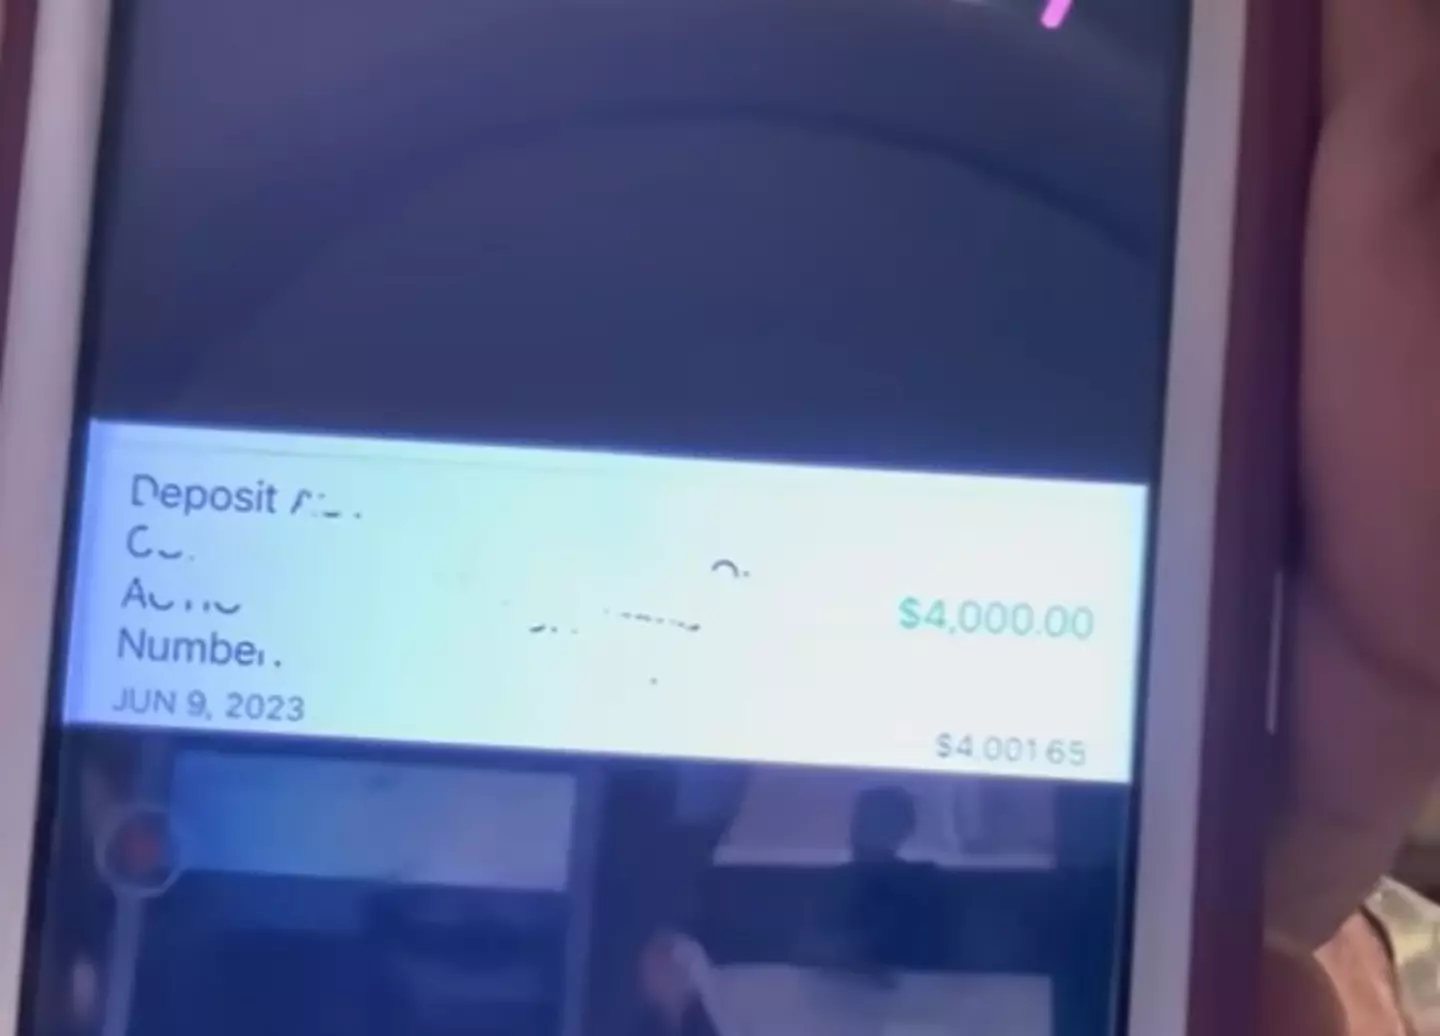 The birthday girl showed on her phone that she paid $4,000.